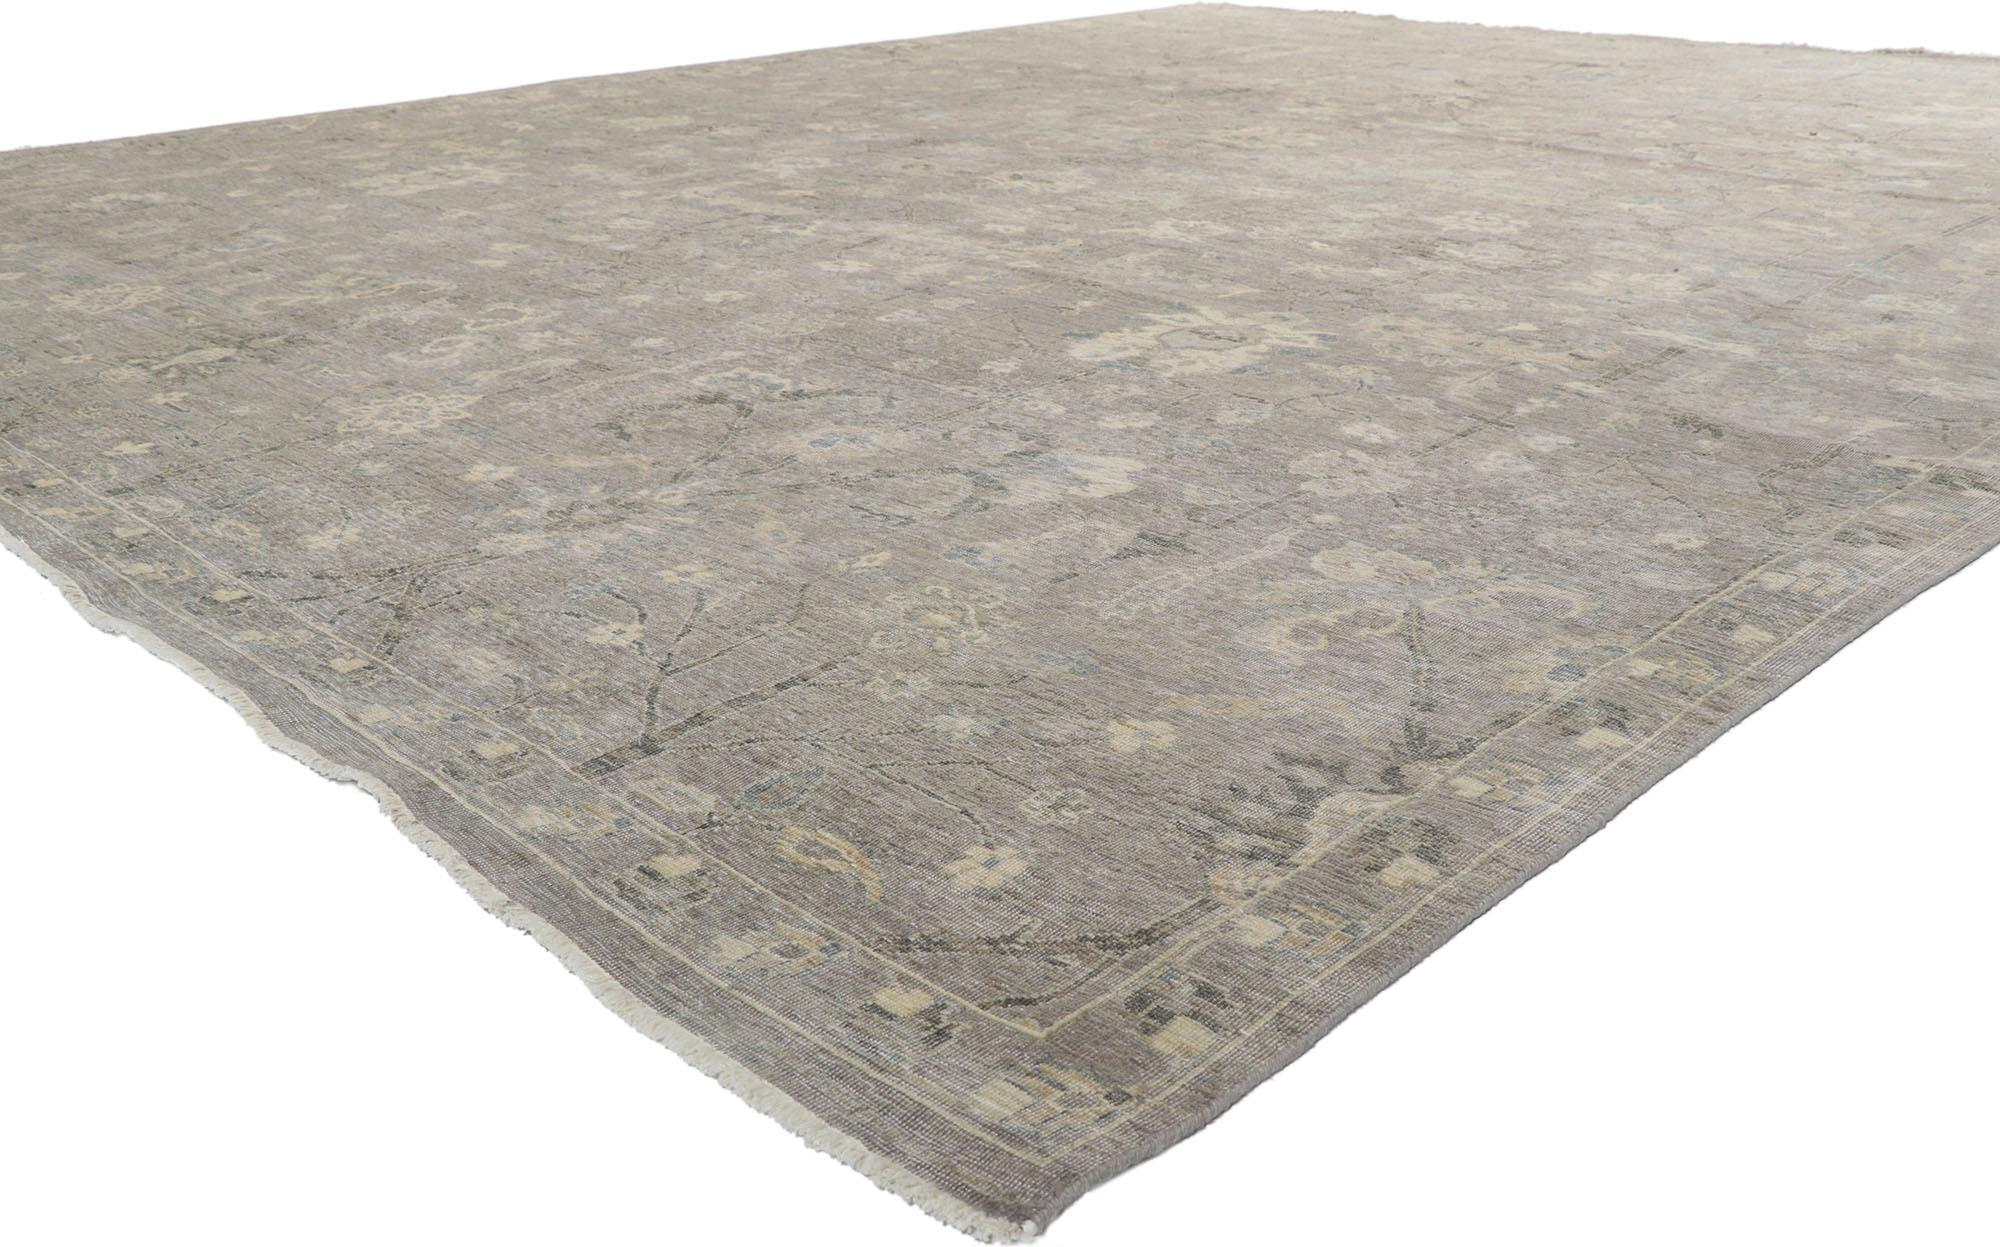 30718 New Contemporary Distressed rug, 11'10 x 14'08. With its neutral colors and weathered beauty combined with nostalgic charm, this new contemporary distressed rug creates an inimitable warmth and calming ambiance. The geometric pattern and